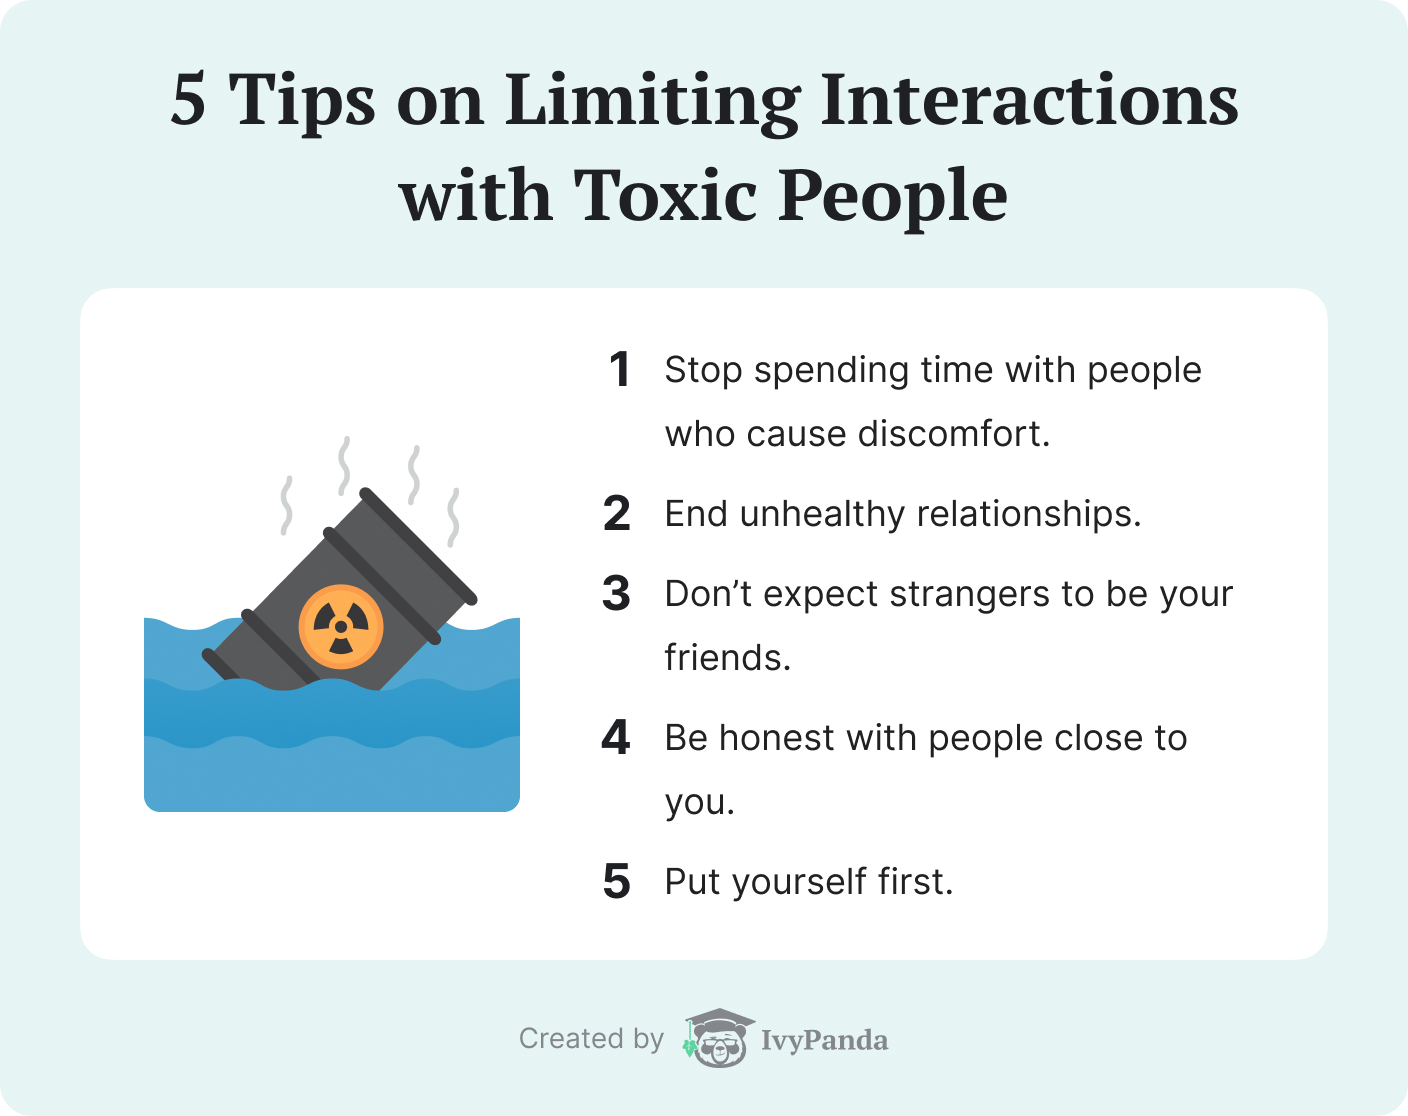 How to limit interactions with toxic people.